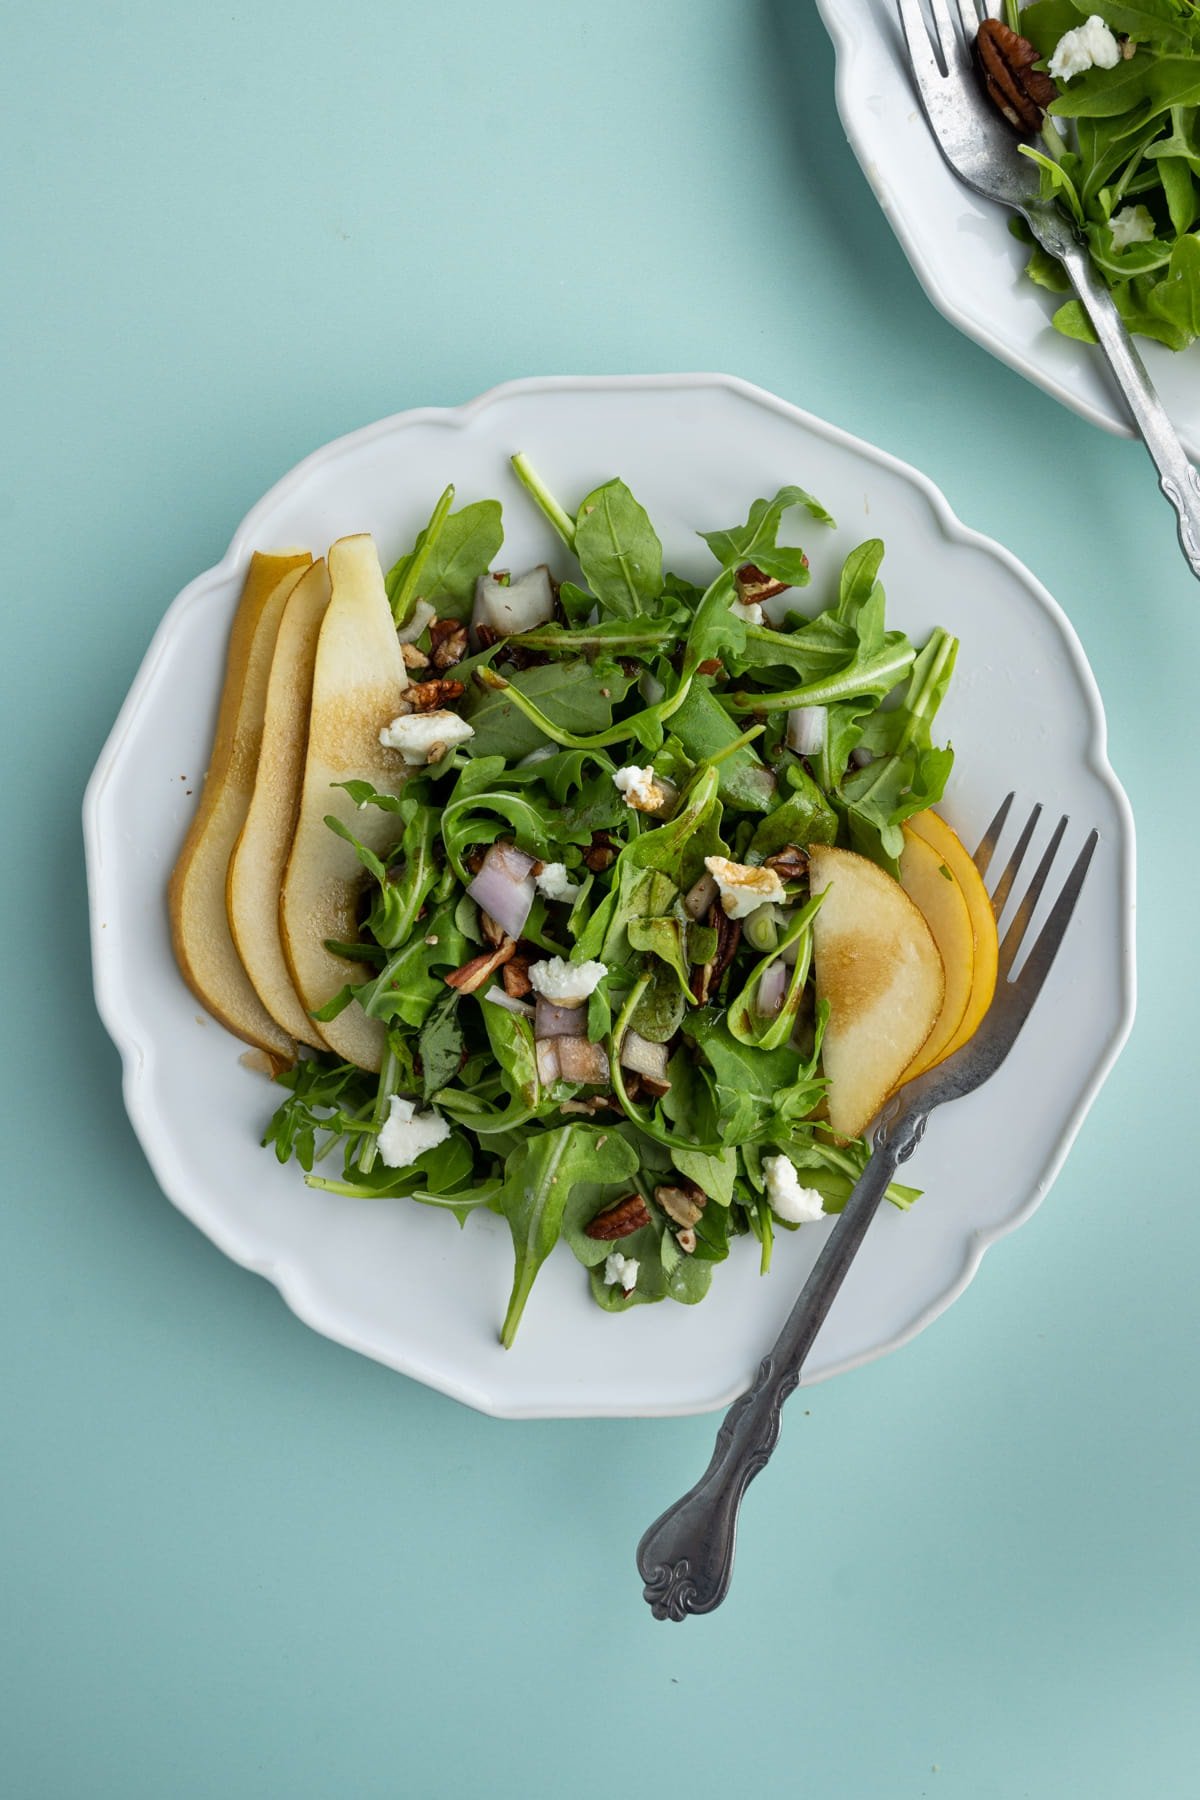 Overhead image of plated salad with sliced pear and arugula